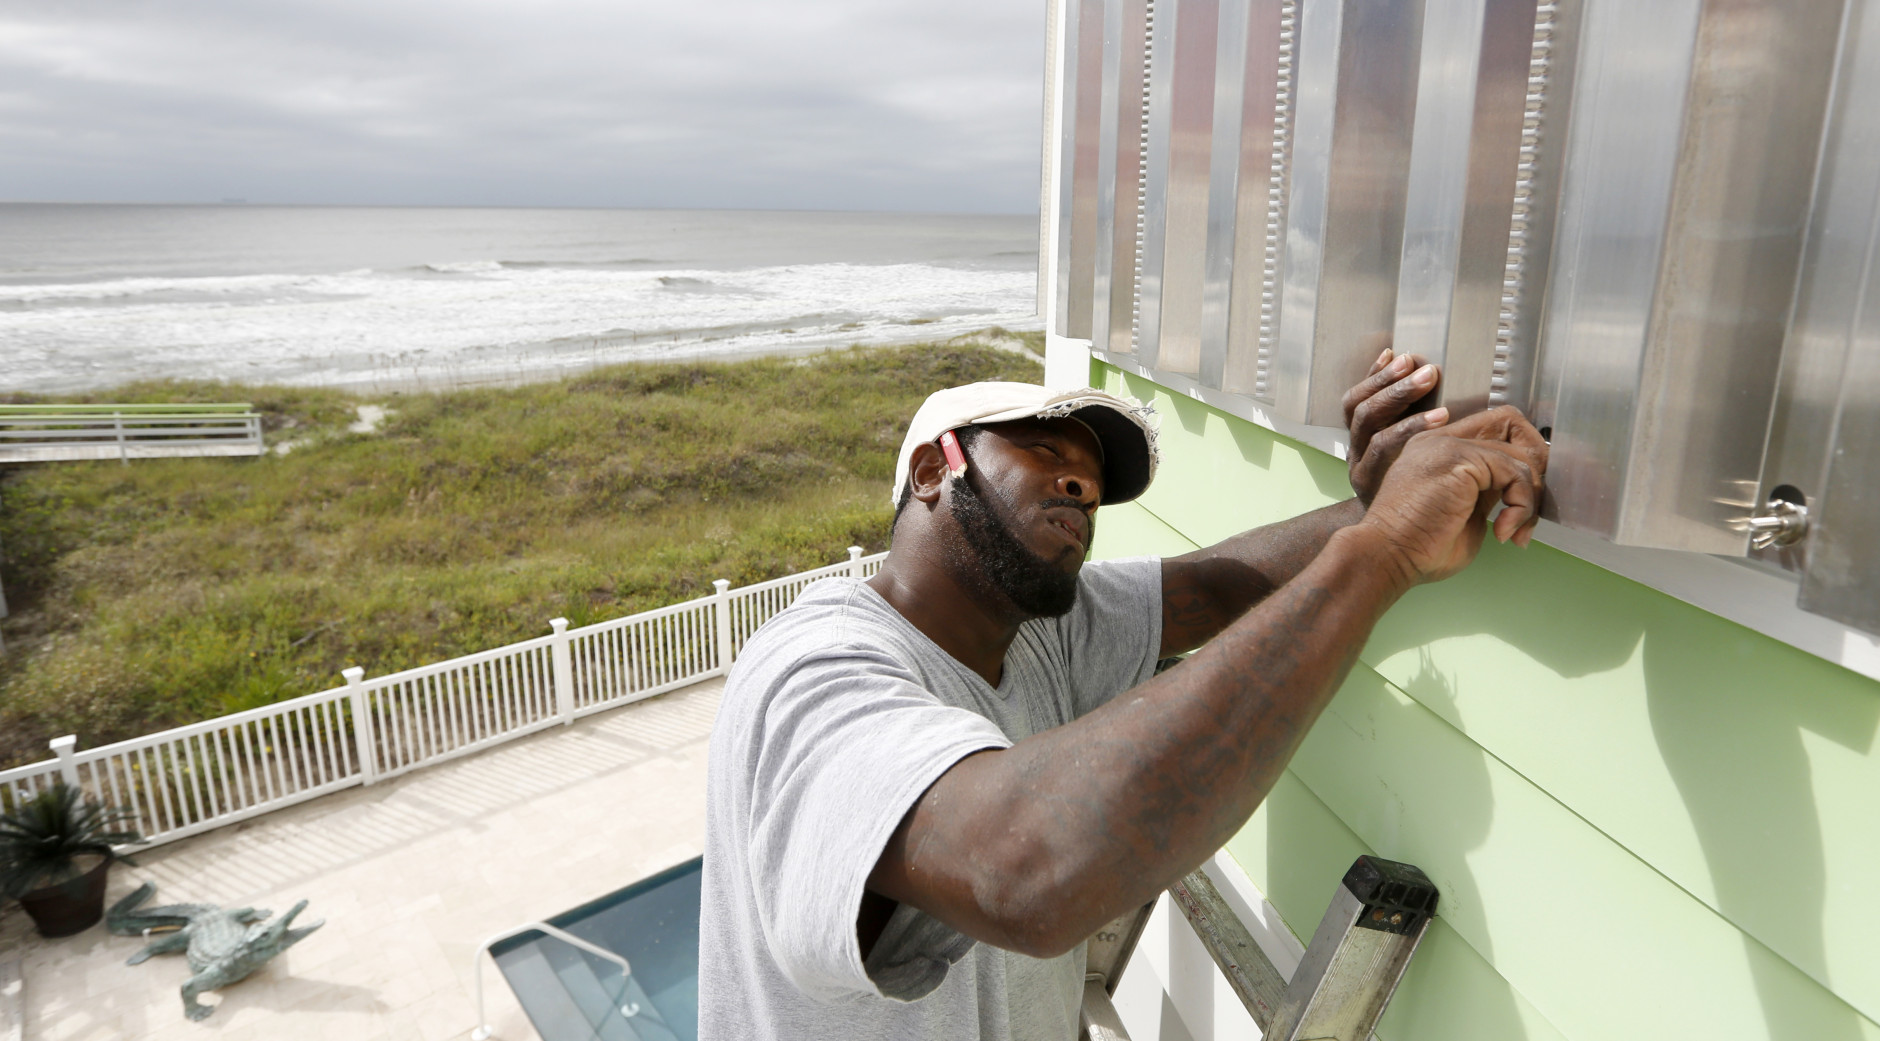 Dimitri Pinckney installs hurricane shutters in advance of Hurricane Matthew on the Isle of Palms, S.C., Wednesday, Oct. 5, 2016. Hurricane Matthew is expected to affect the South Carolina coast by the weekend. Gov. Nikki Haley announced Tuesday that, unless the track of the storm changes, the state will issue an evacuation order Wednesday to help get 1 million people inland from the coast. (AP Photo/Mic Smith)